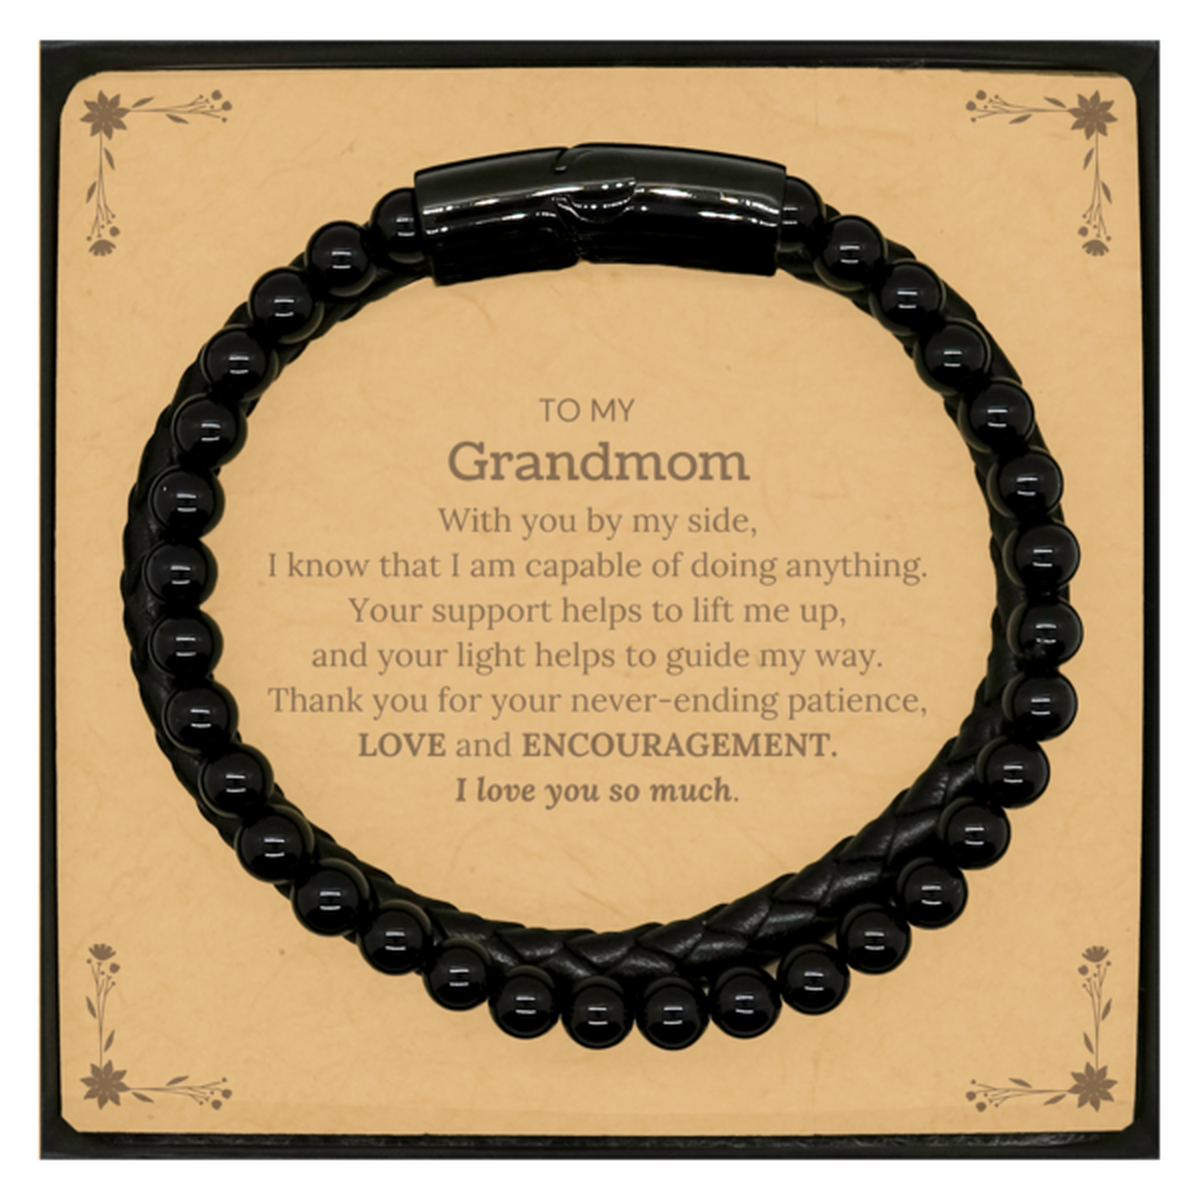 Appreciation Grandmom Stone Leather Bracelets Gifts, To My Grandmom Birthday Christmas Wedding Keepsake Gifts for Grandmom With you by my side, I know that I am capable of doing anything. I love you so much